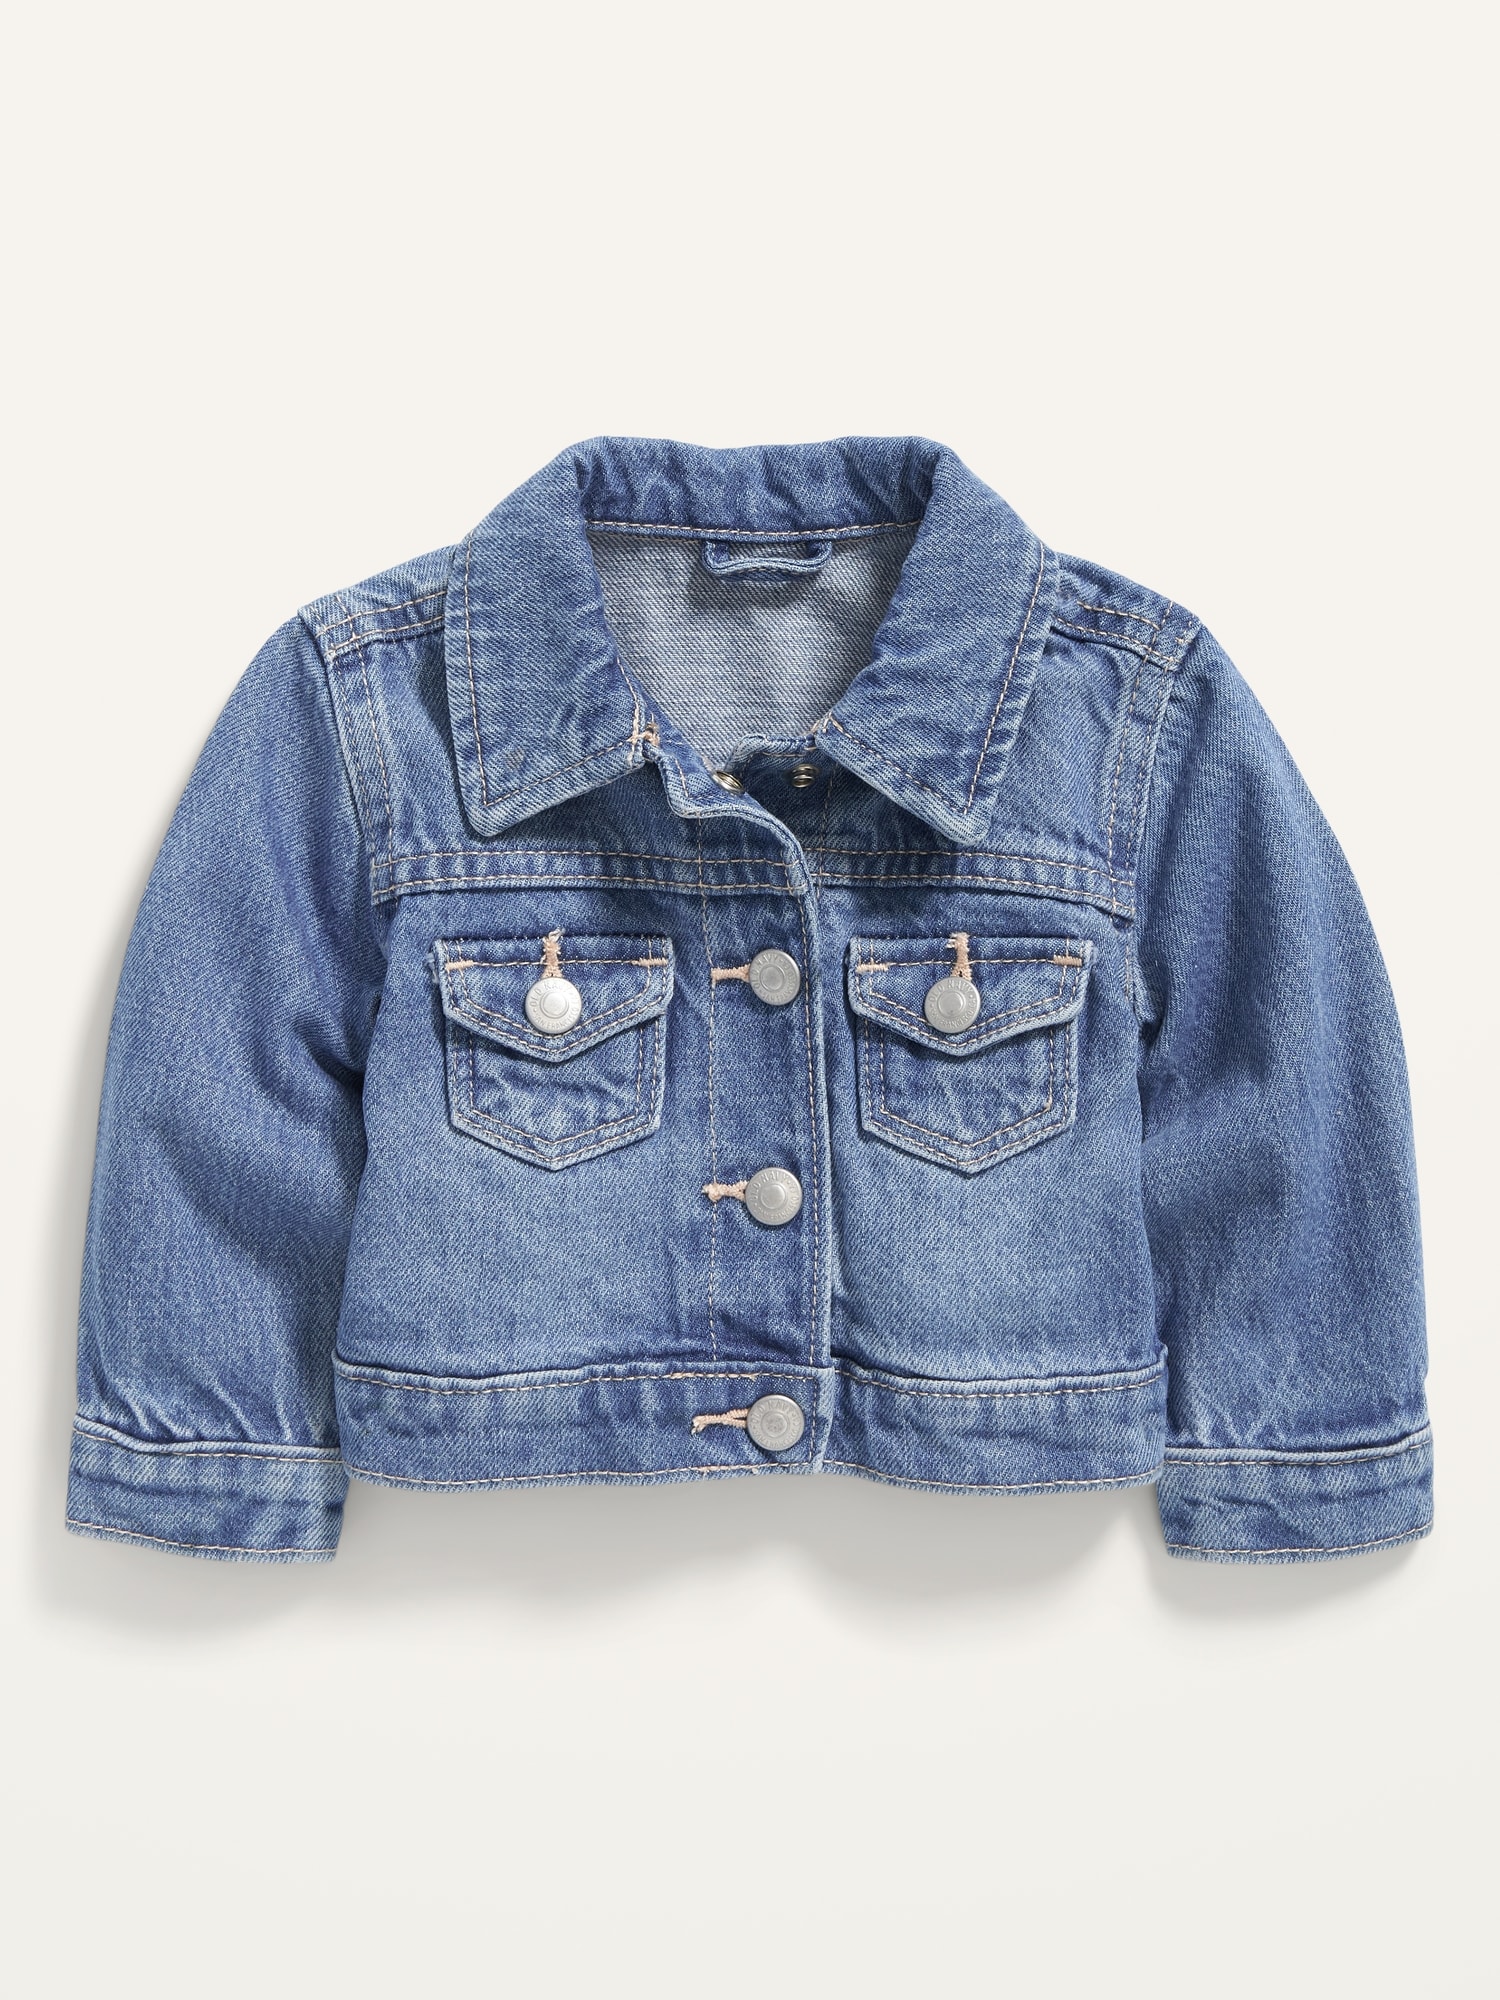 Unisex Jean Jacket for Baby | Old Navy